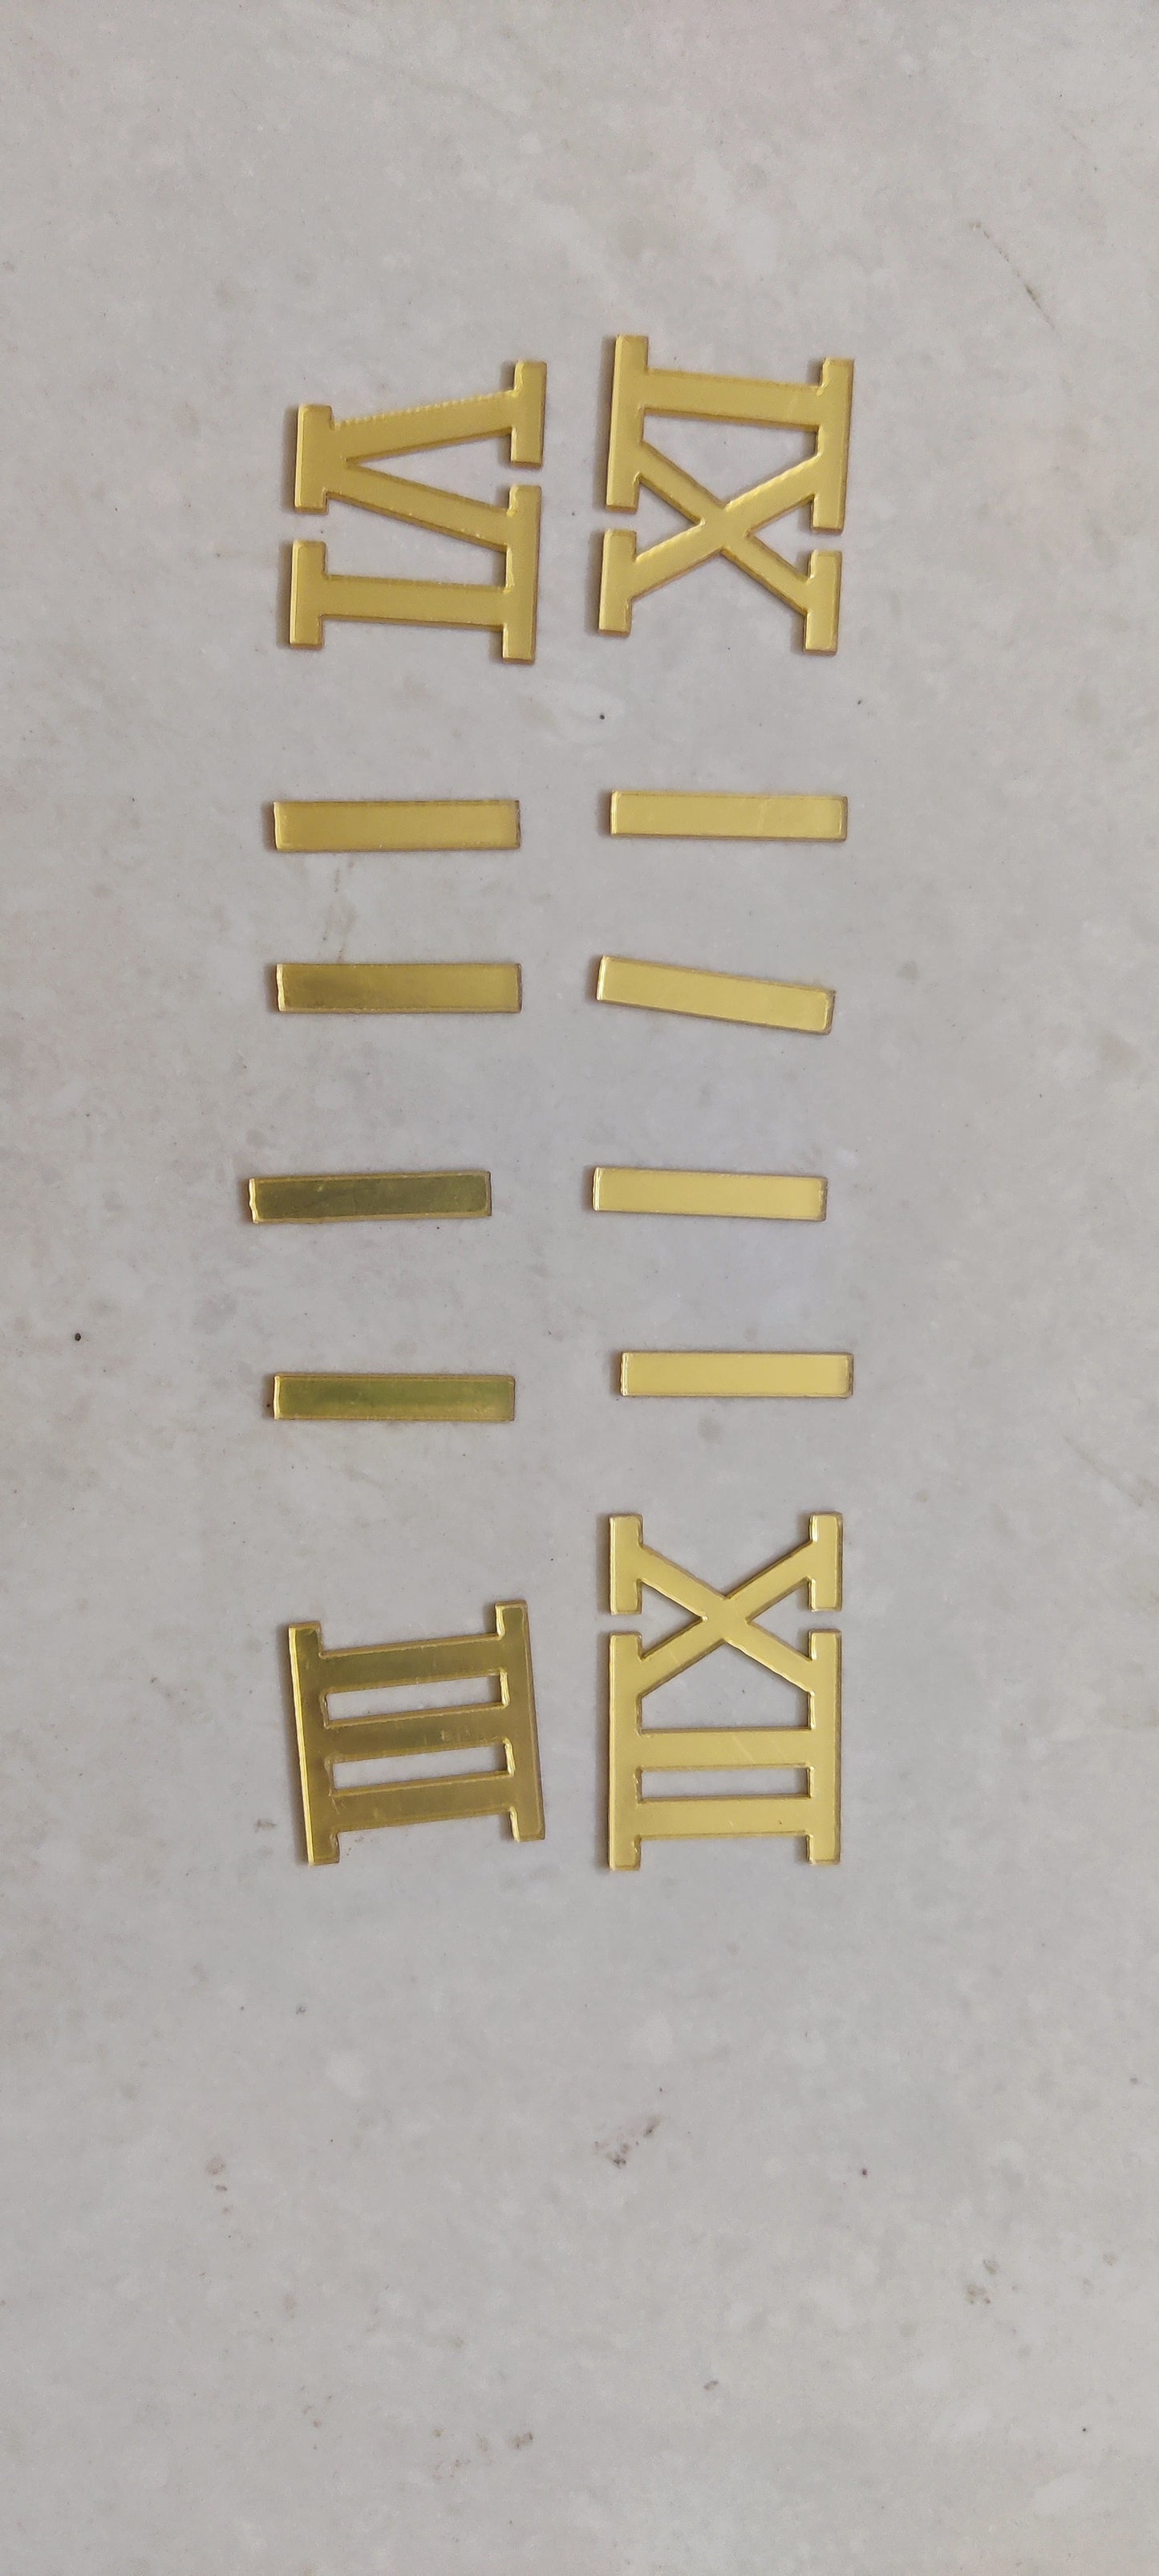 1" roman acrylic number for Clock